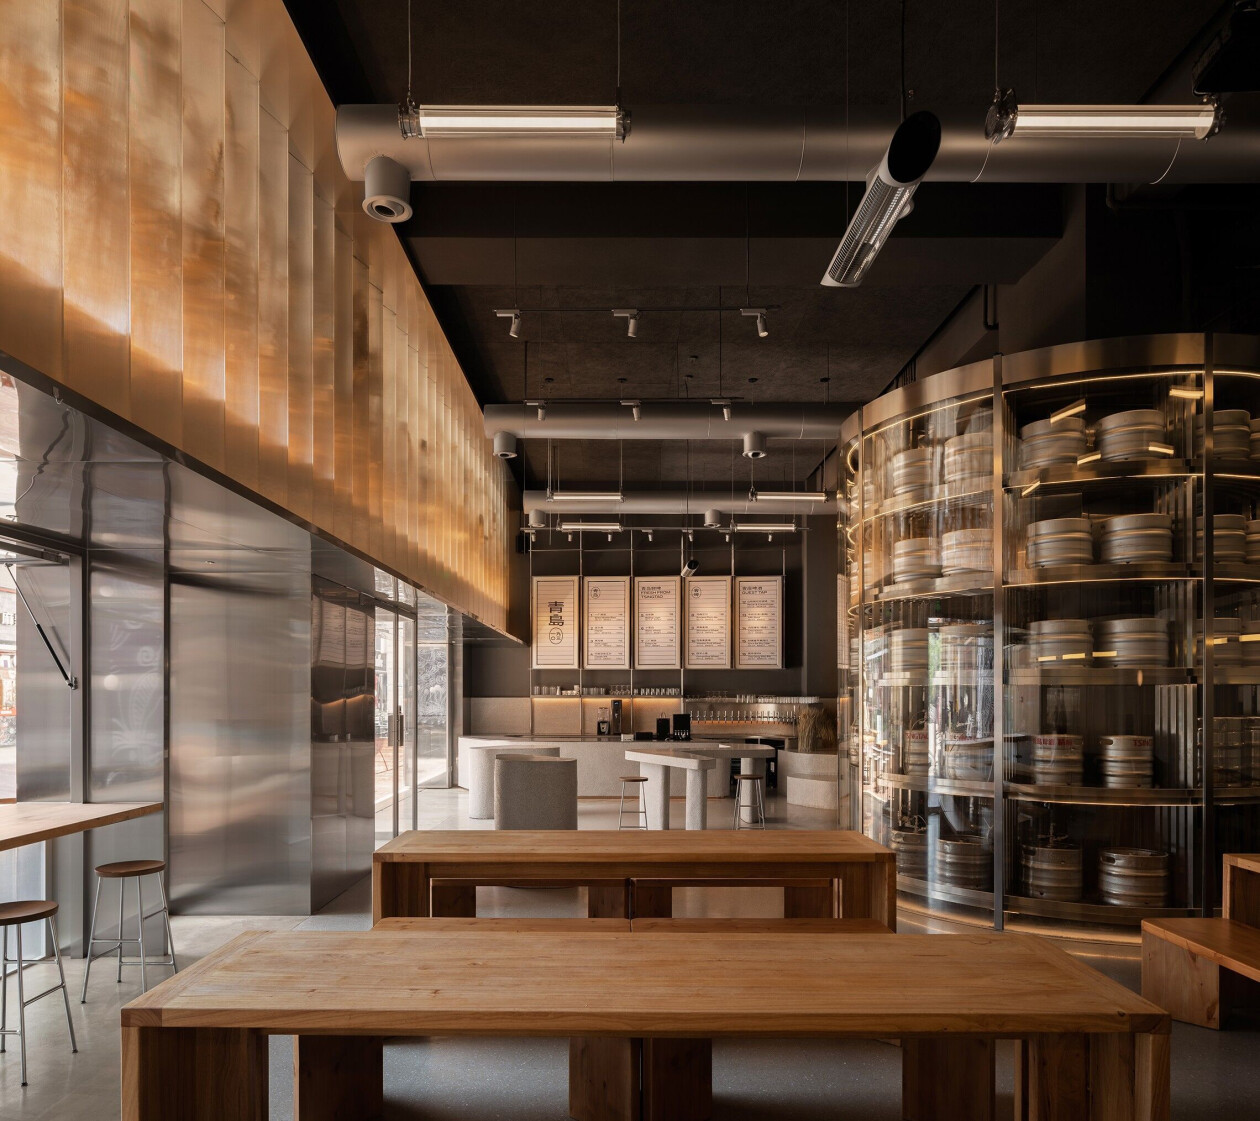 Tsingtao 1903 Taproom by MINOR Lab brings a new brand experience to Beijing beer bar culture